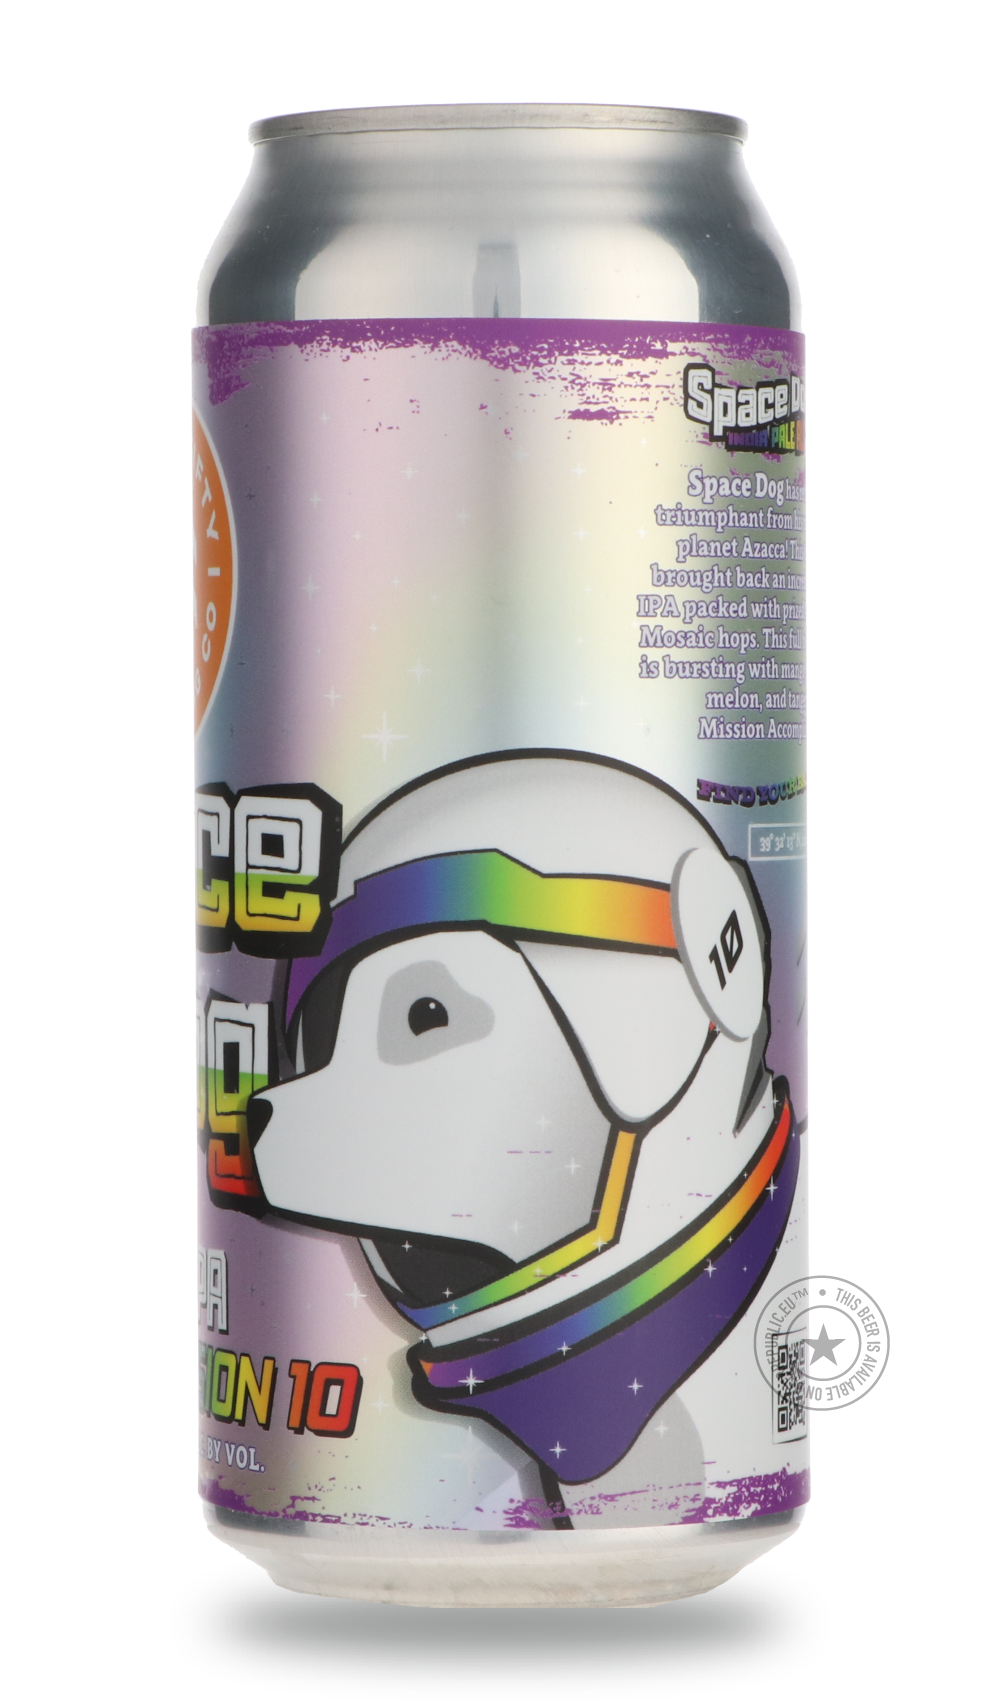 -FiftyFifty- Space Dog Mission 10-IPA- Only @ Beer Republic - The best online beer store for American & Canadian craft beer - Buy beer online from the USA and Canada - Bier online kopen - Amerikaans bier kopen - Craft beer store - Craft beer kopen - Amerikanisch bier kaufen - Bier online kaufen - Acheter biere online - IPA - Stout - Porter - New England IPA - Hazy IPA - Imperial Stout - Barrel Aged - Barrel Aged Imperial Stout - Brown - Dark beer - Blond - Blonde - Pilsner - Lager - Wheat - Weizen - Amber -